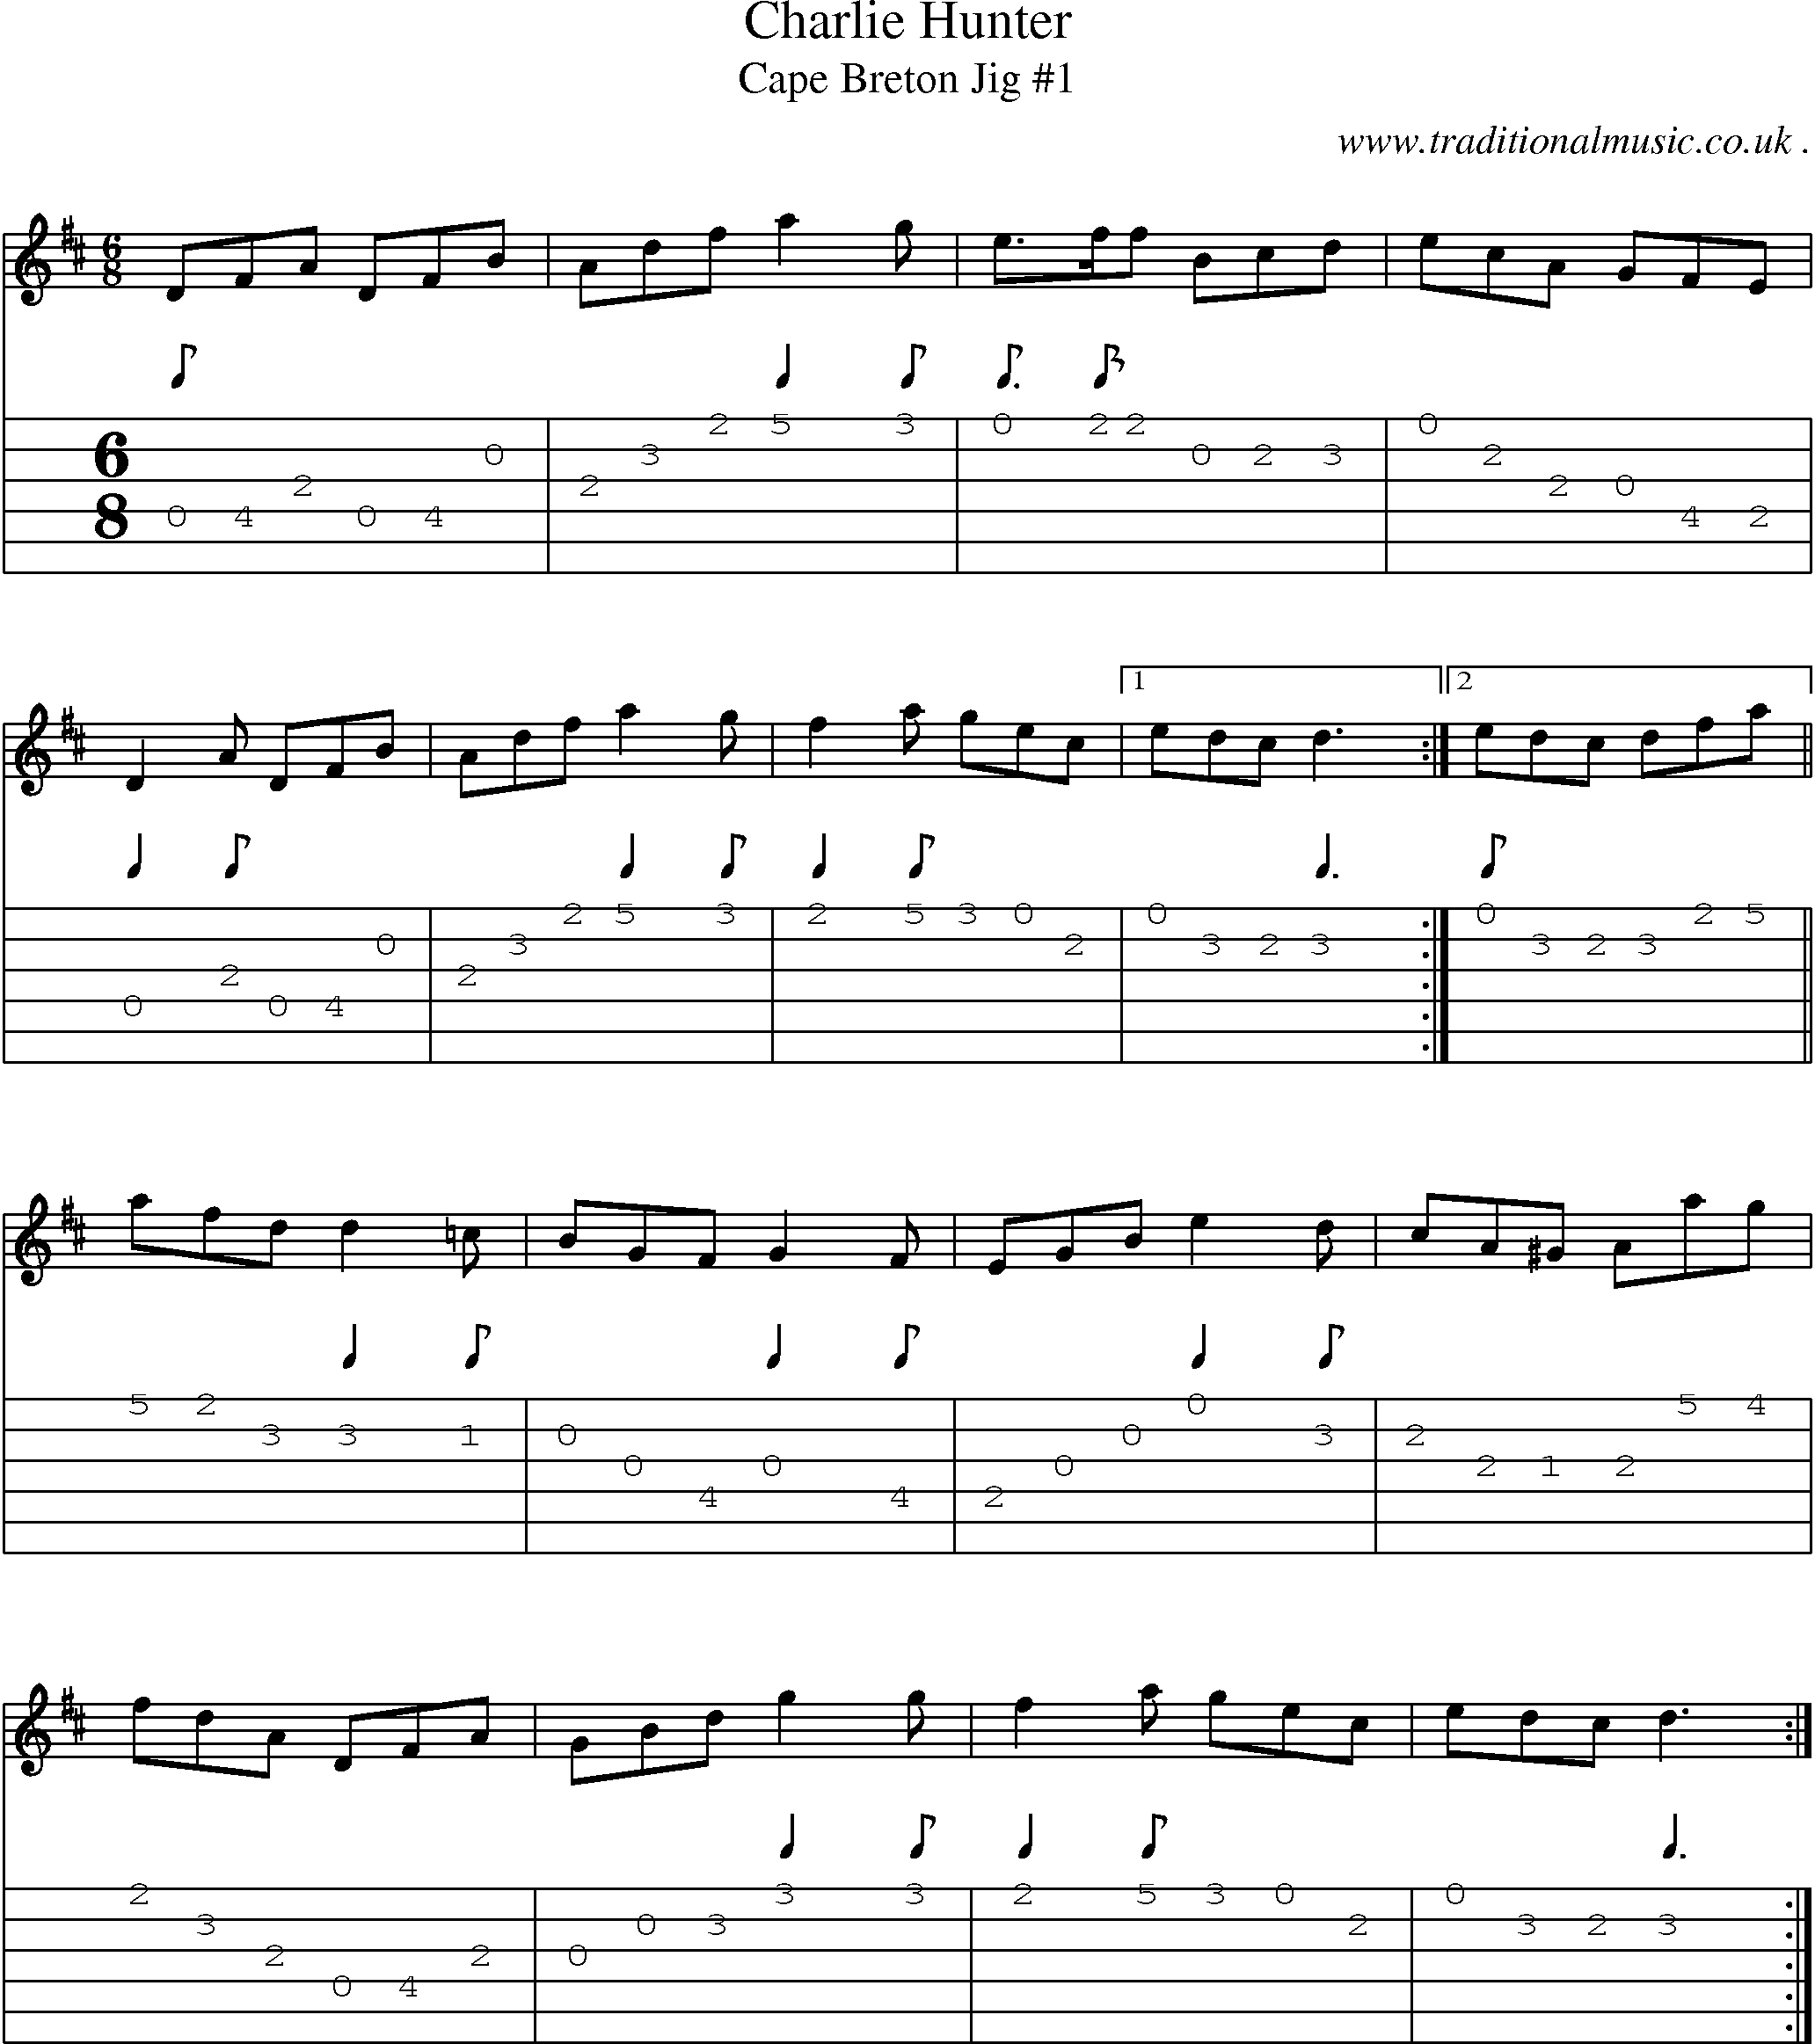 Sheet-Music and Guitar Tabs for Charlie Hunter